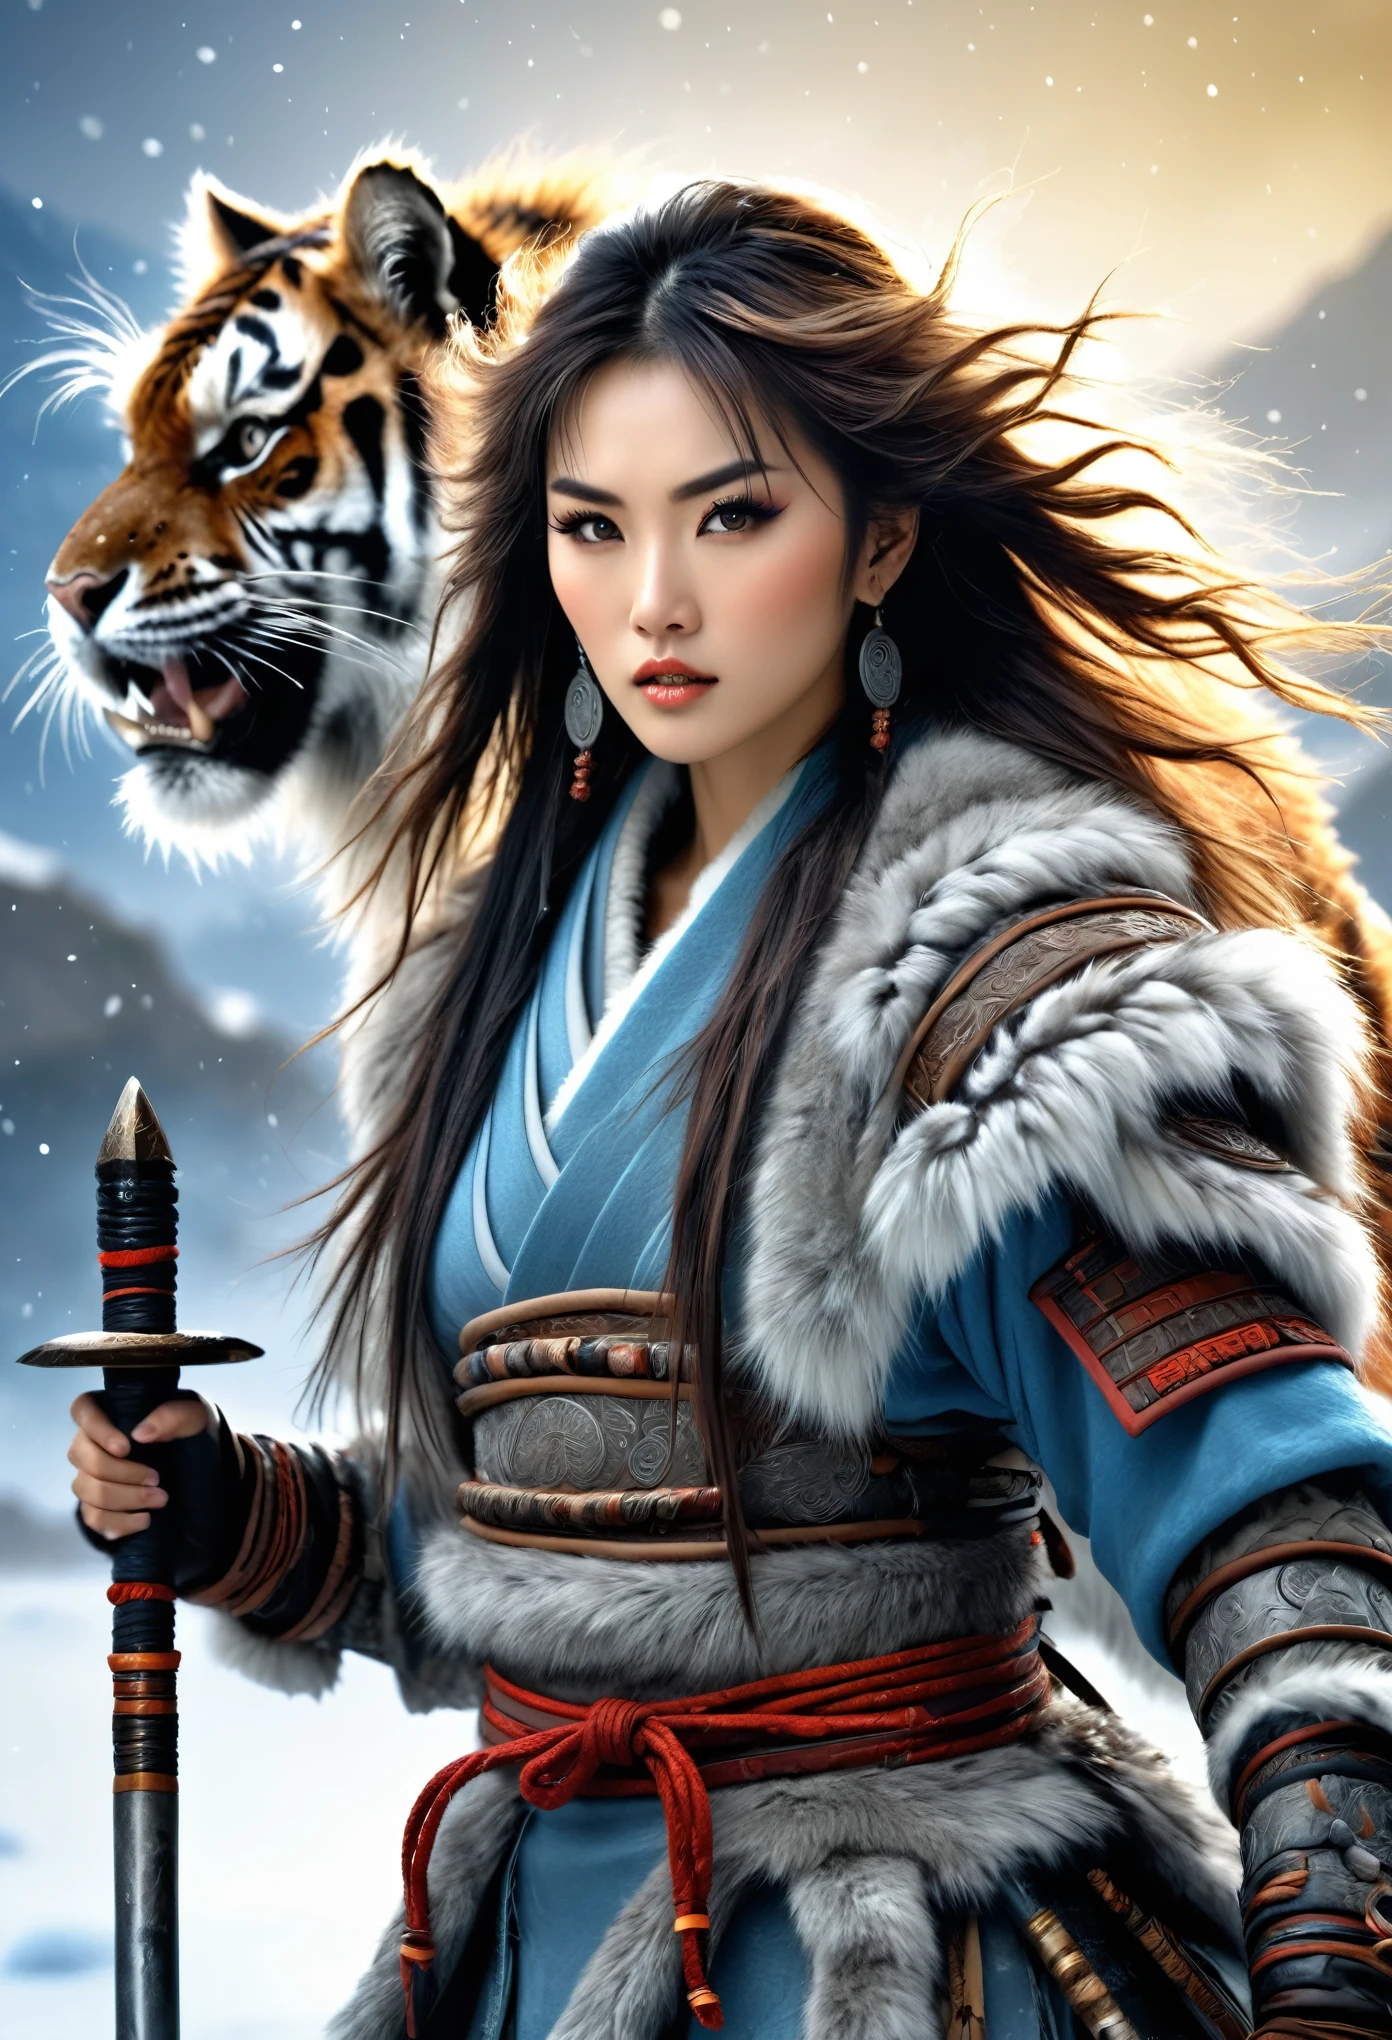 (best quality,4k,8K,High resolution,masterpiece:1.2),Extremely detailed,(Practical,photoPractical,photo-Practical:1.37),Thick fur winter coat,Creative fusion of traditional Chinese design patterns and contemporary elements, Messy hair, Intense expression, Energetic, Sharp eyes, 1 Samurai, Handsome face, Tiger beast, Epic Fantasy Character Art, wearing intricate fur armor, Luis Royo (Luis Royo) style, Northern female warrior holding a spear, HDR, Ultra HD, Studio Lighting, Super Fine, Clear focus, Physically Based Rendering, Extremely detailed的描述, professional, Bright colors, Bokeh, portrait, landscape